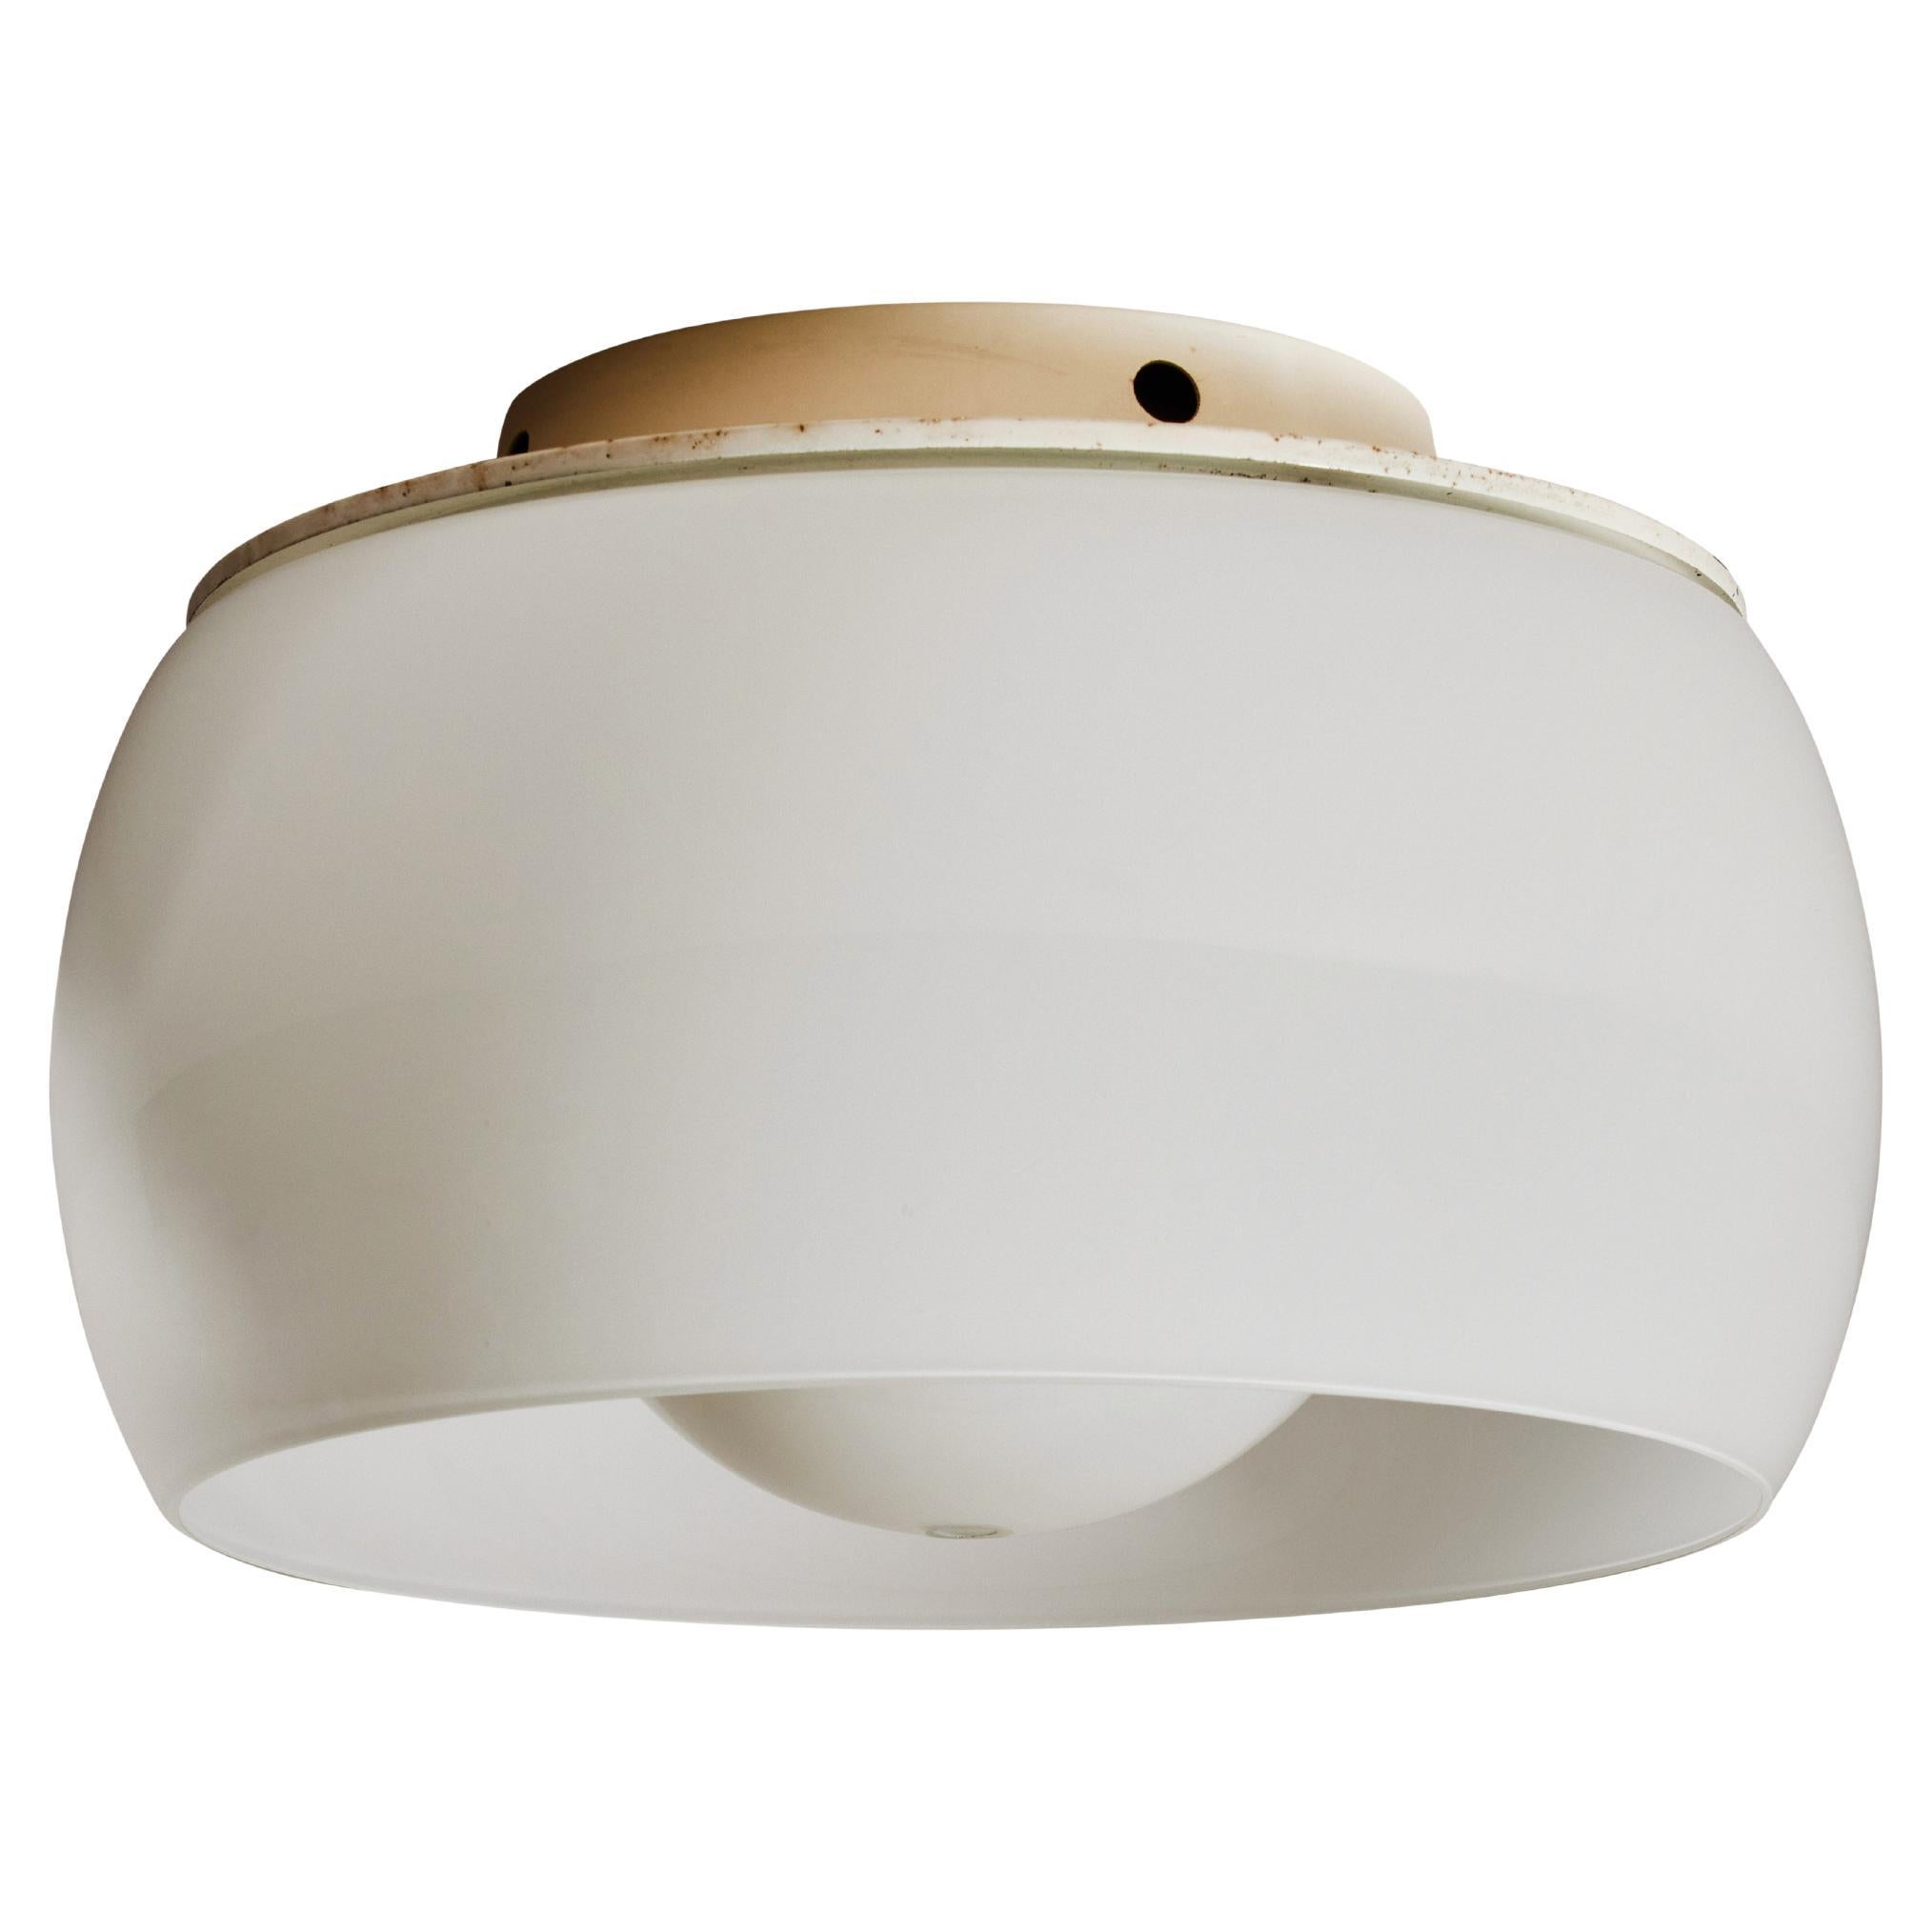 Six Clinio Flush Mount Ceiling Lights by Vico Magistretti for Artemide